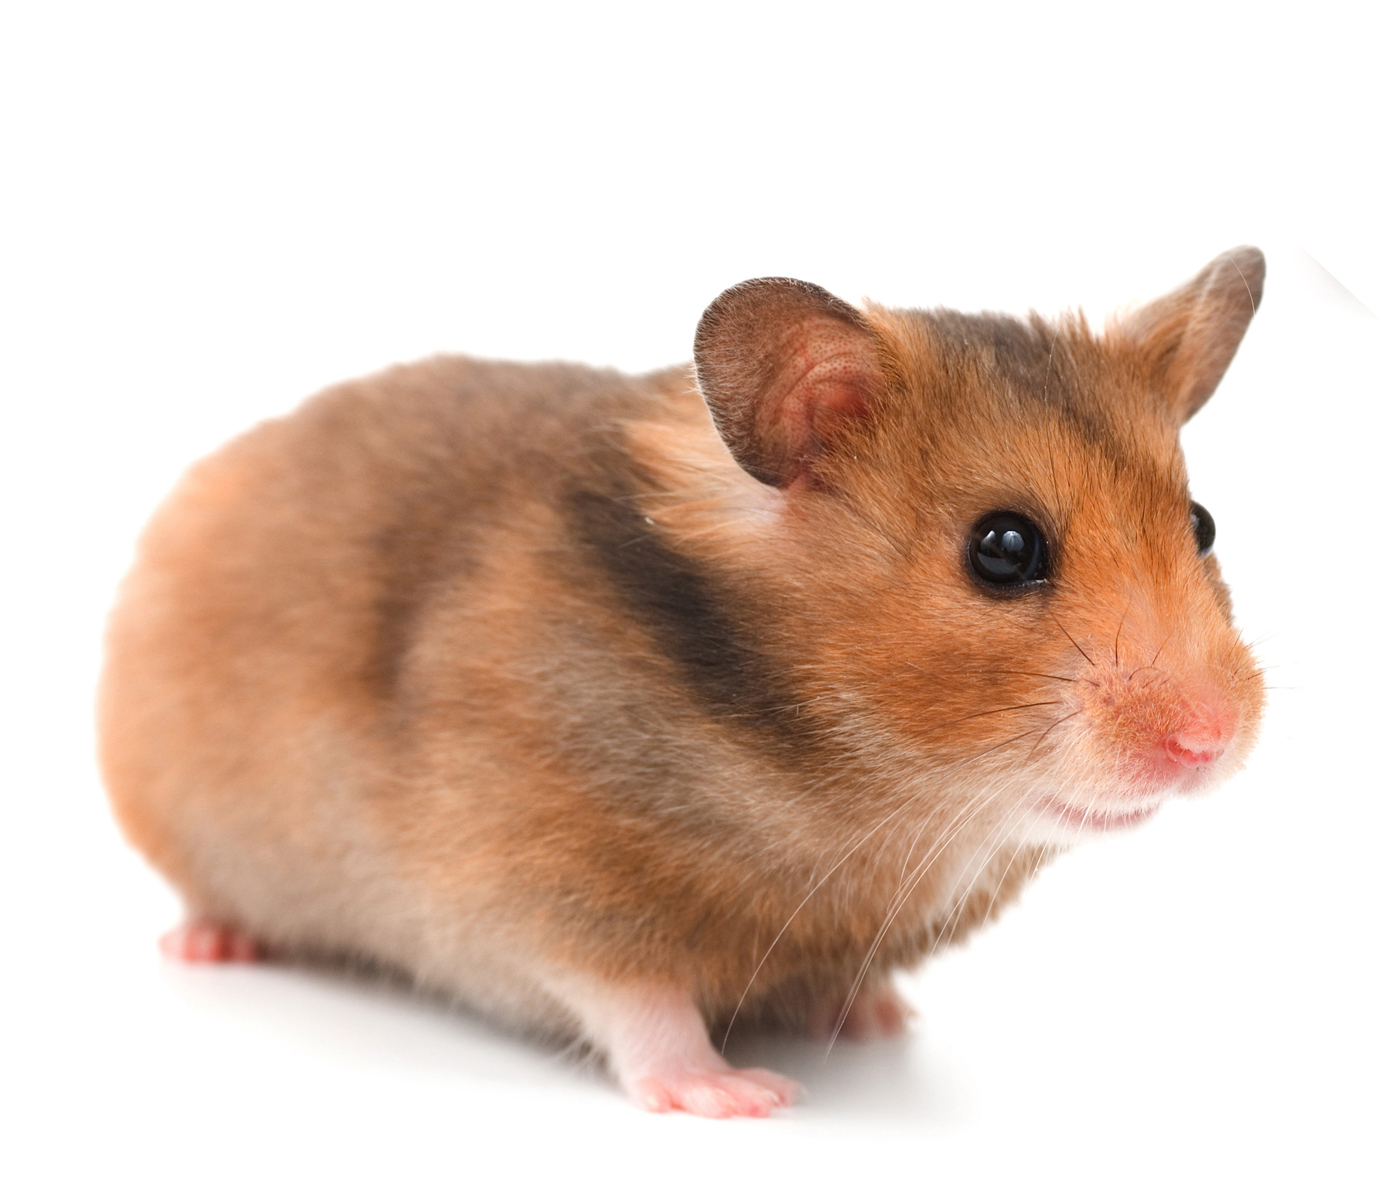 Firefighter Performs Life Saving Cpr On A Hamster Kindness